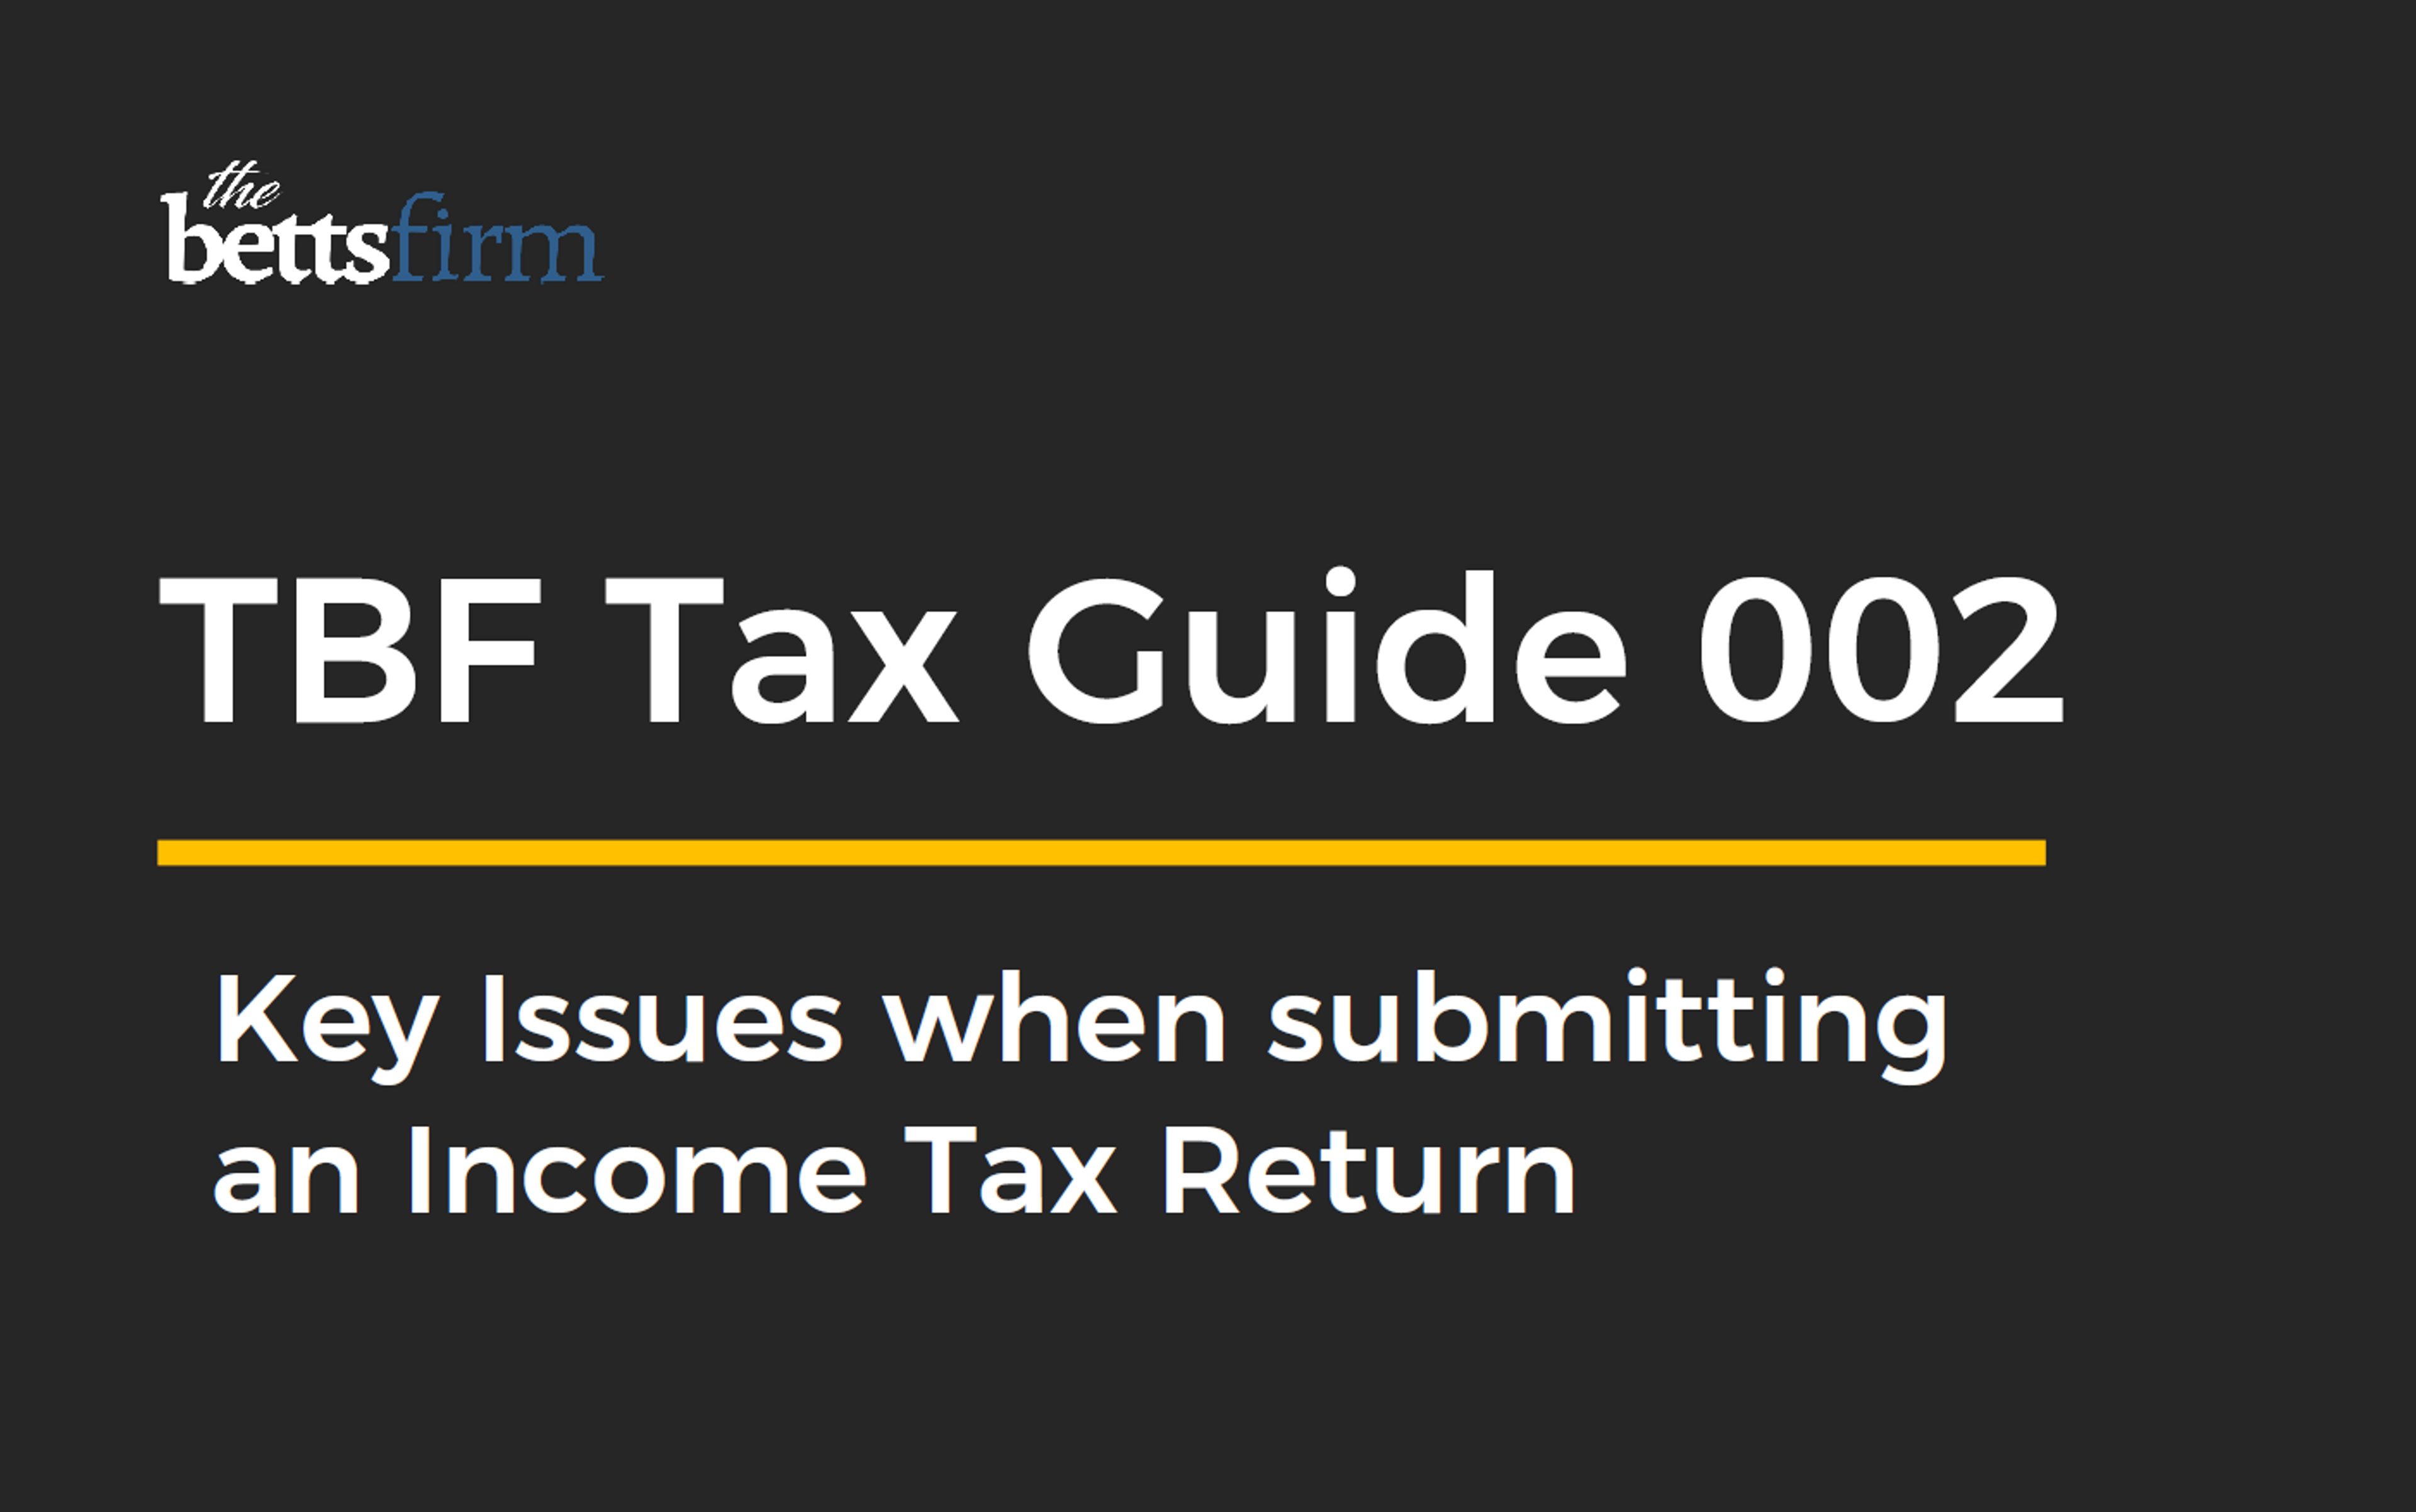 TBF Tax Guide 002 - Key Issues when submitting an Income Tax Return